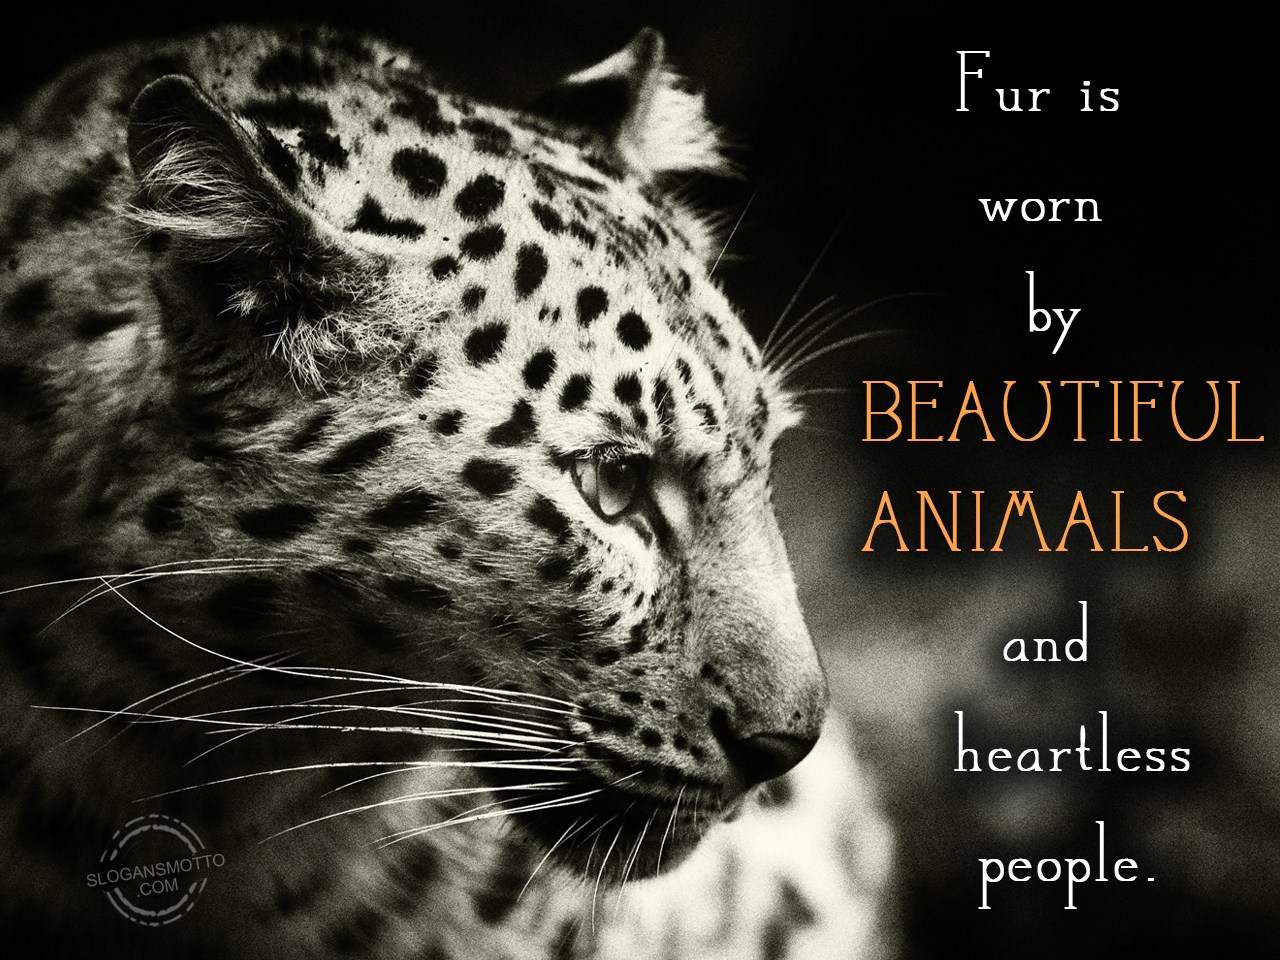 Fur is worn by beautiful animals and heartless people. 